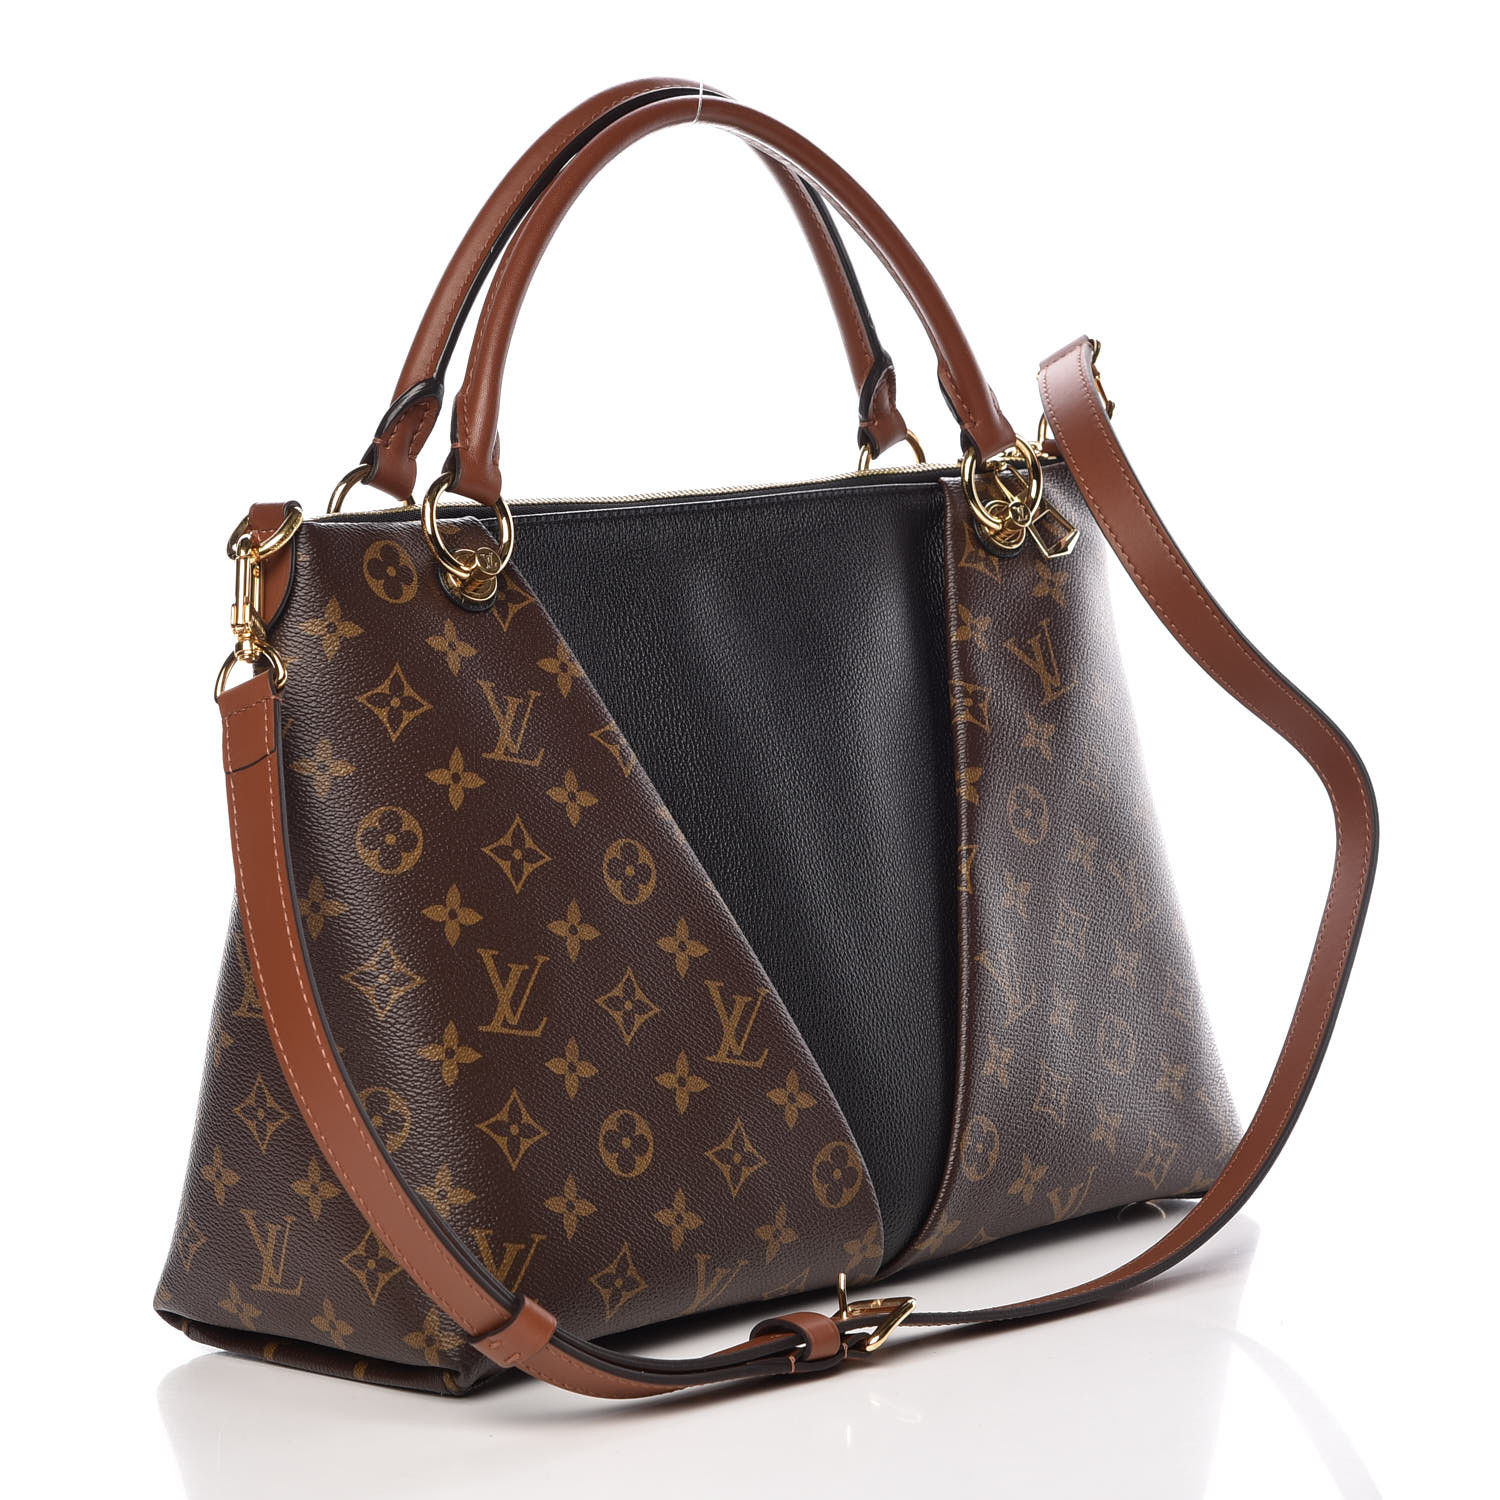 WHAT'S IN MY BAG?! LOUIS VUITTON MONOGRAM V TOTE - MINI REVIEW +